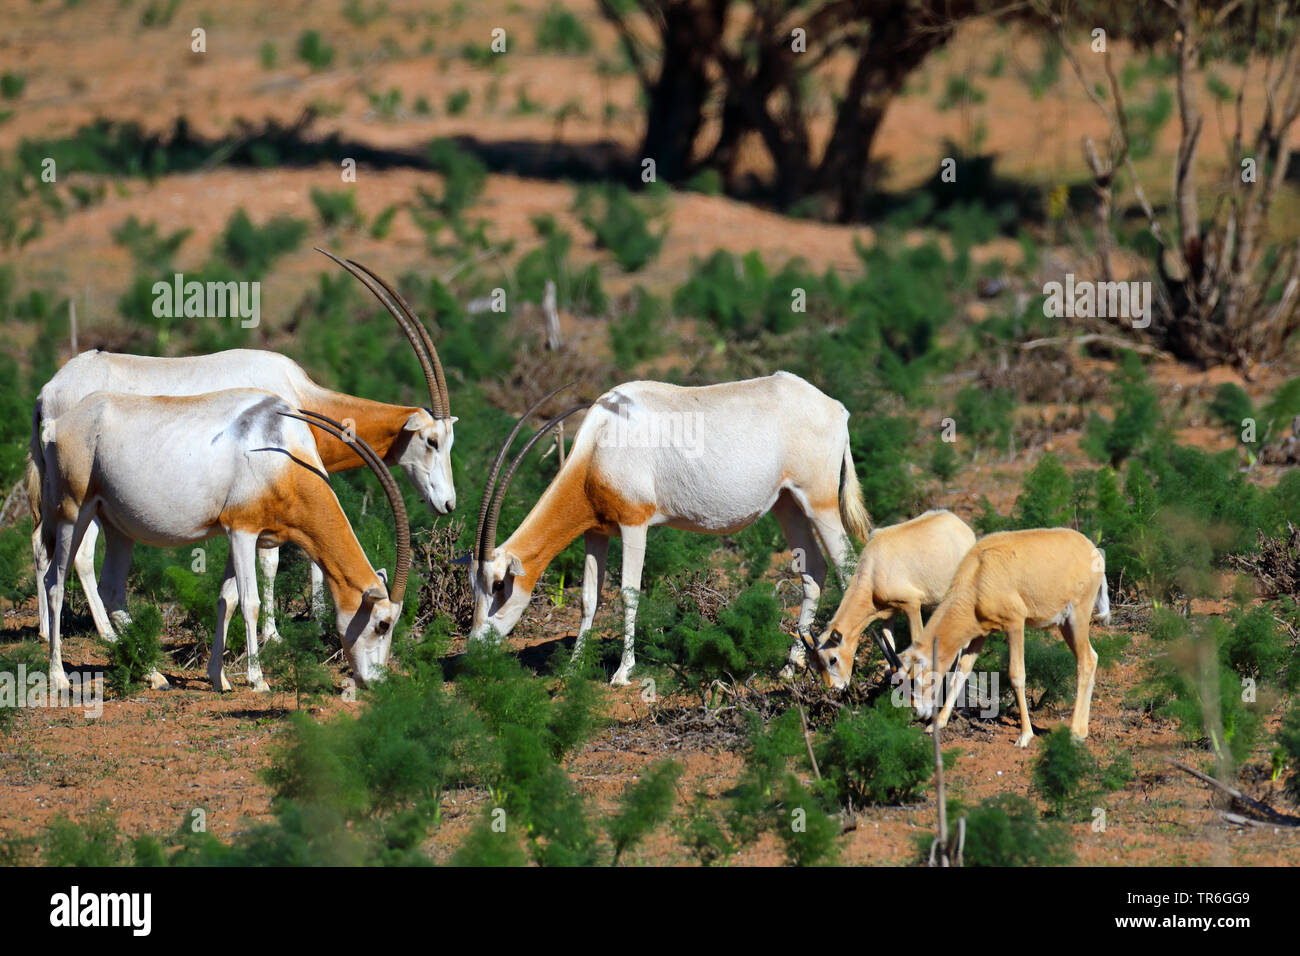 scimitar oryx, scimitar-horned oryx (Oryx dammah), eating group with young animals, Morocco, Souss Massa National Park Stock Photo